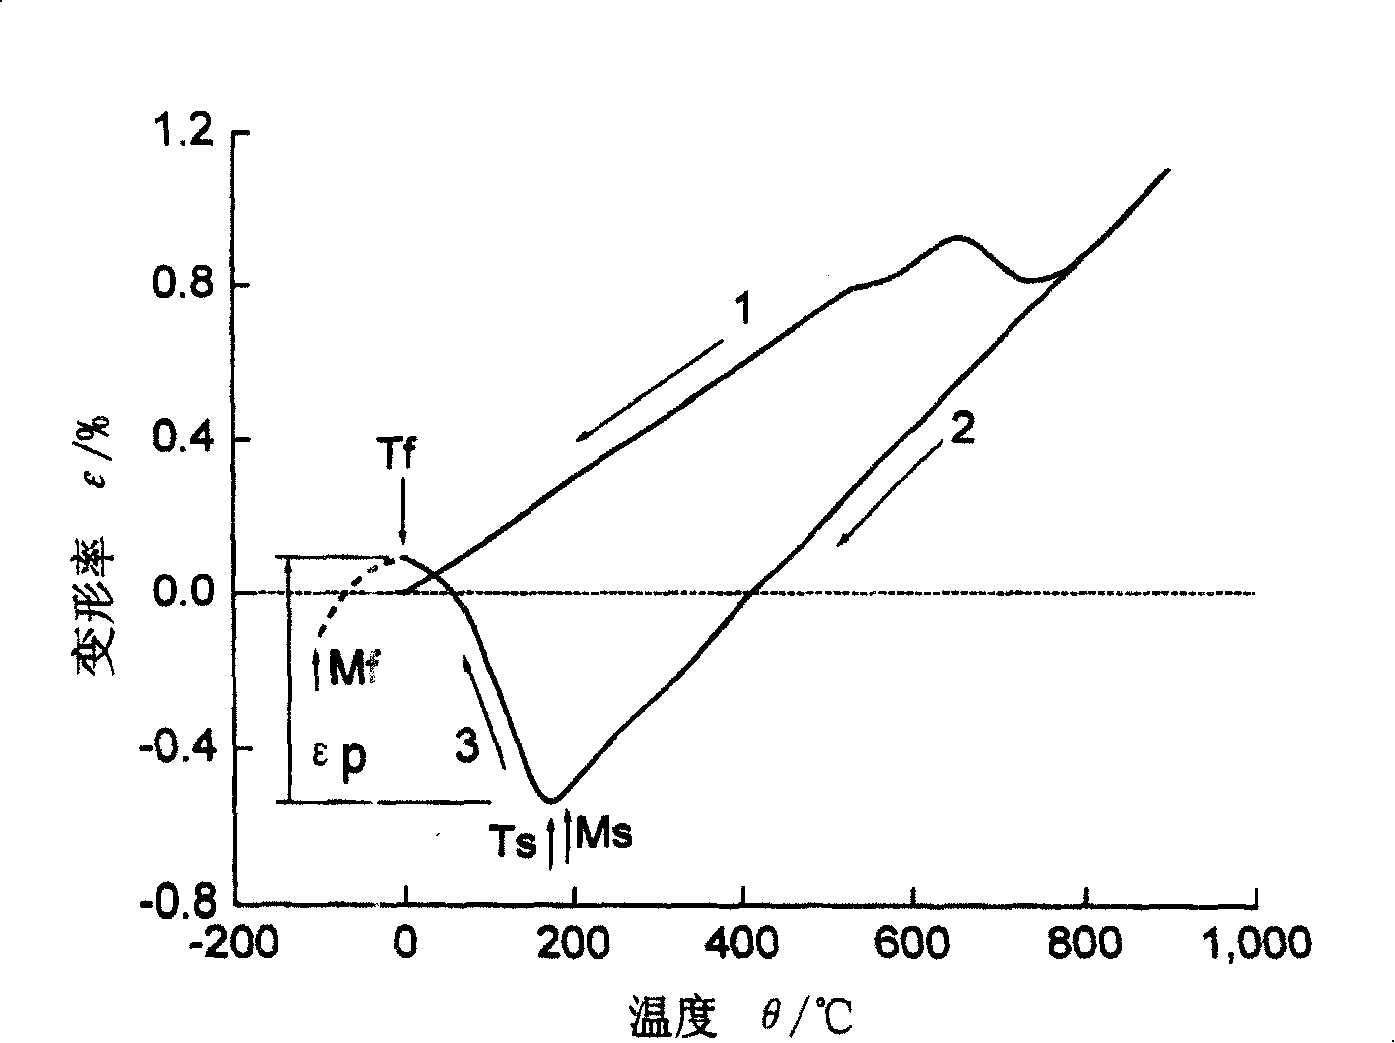 Alloy powder capable of producing compression stress in the fused-on layer